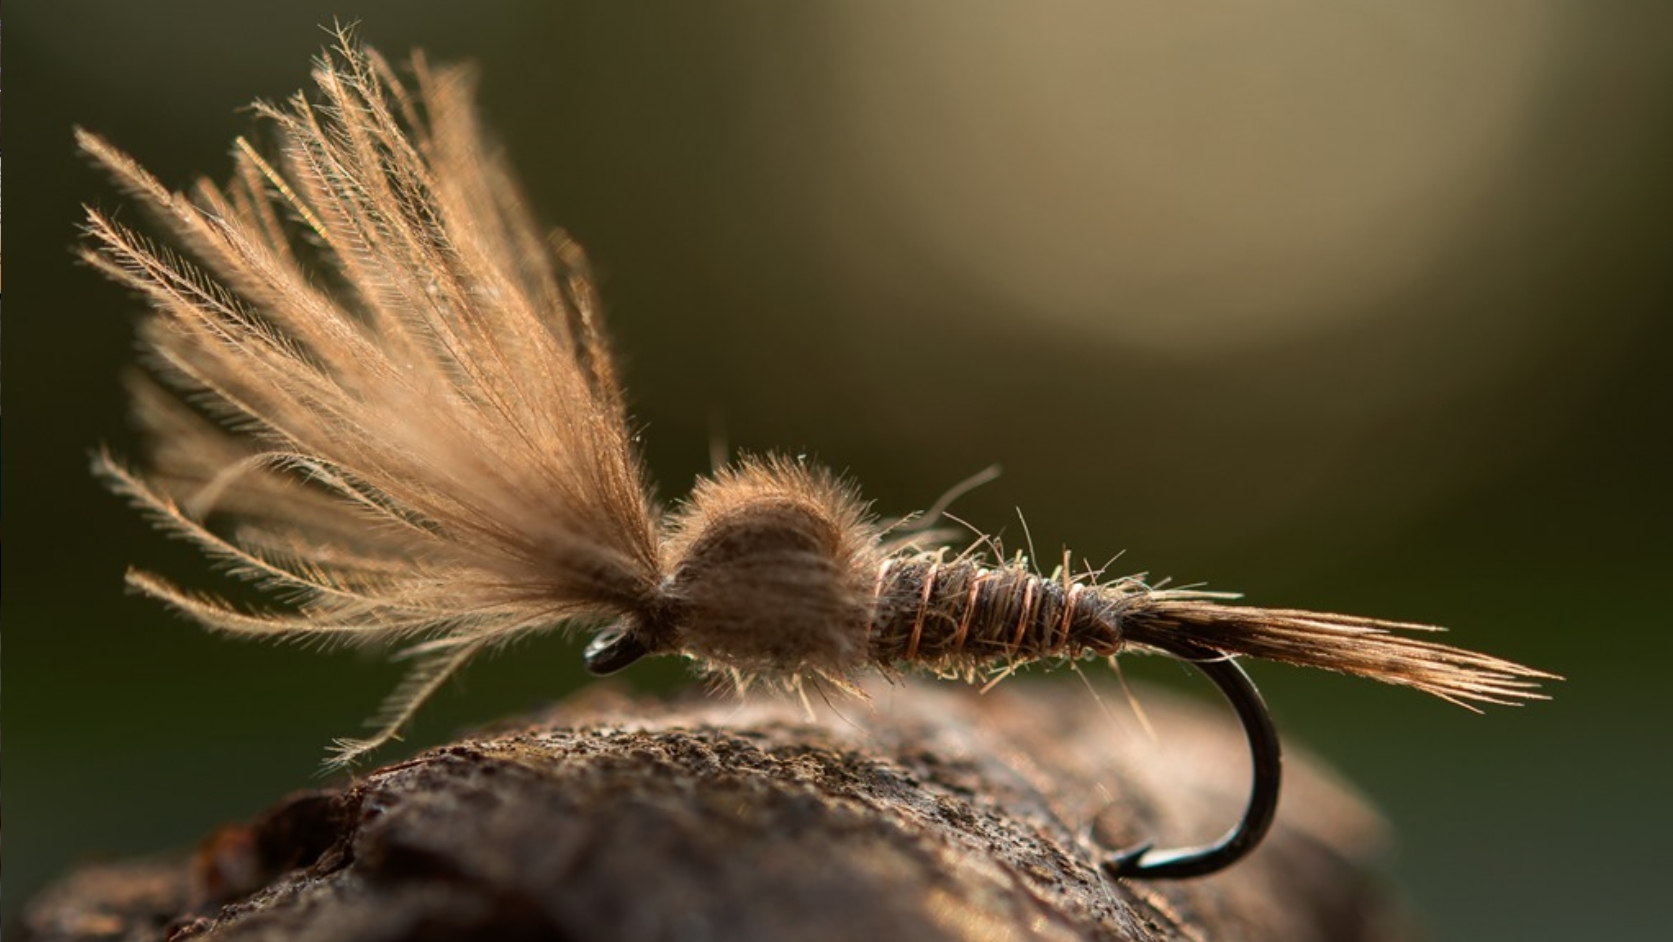 New Ahrex Hooks Freshwater Series - Coming Soon - Troutlore